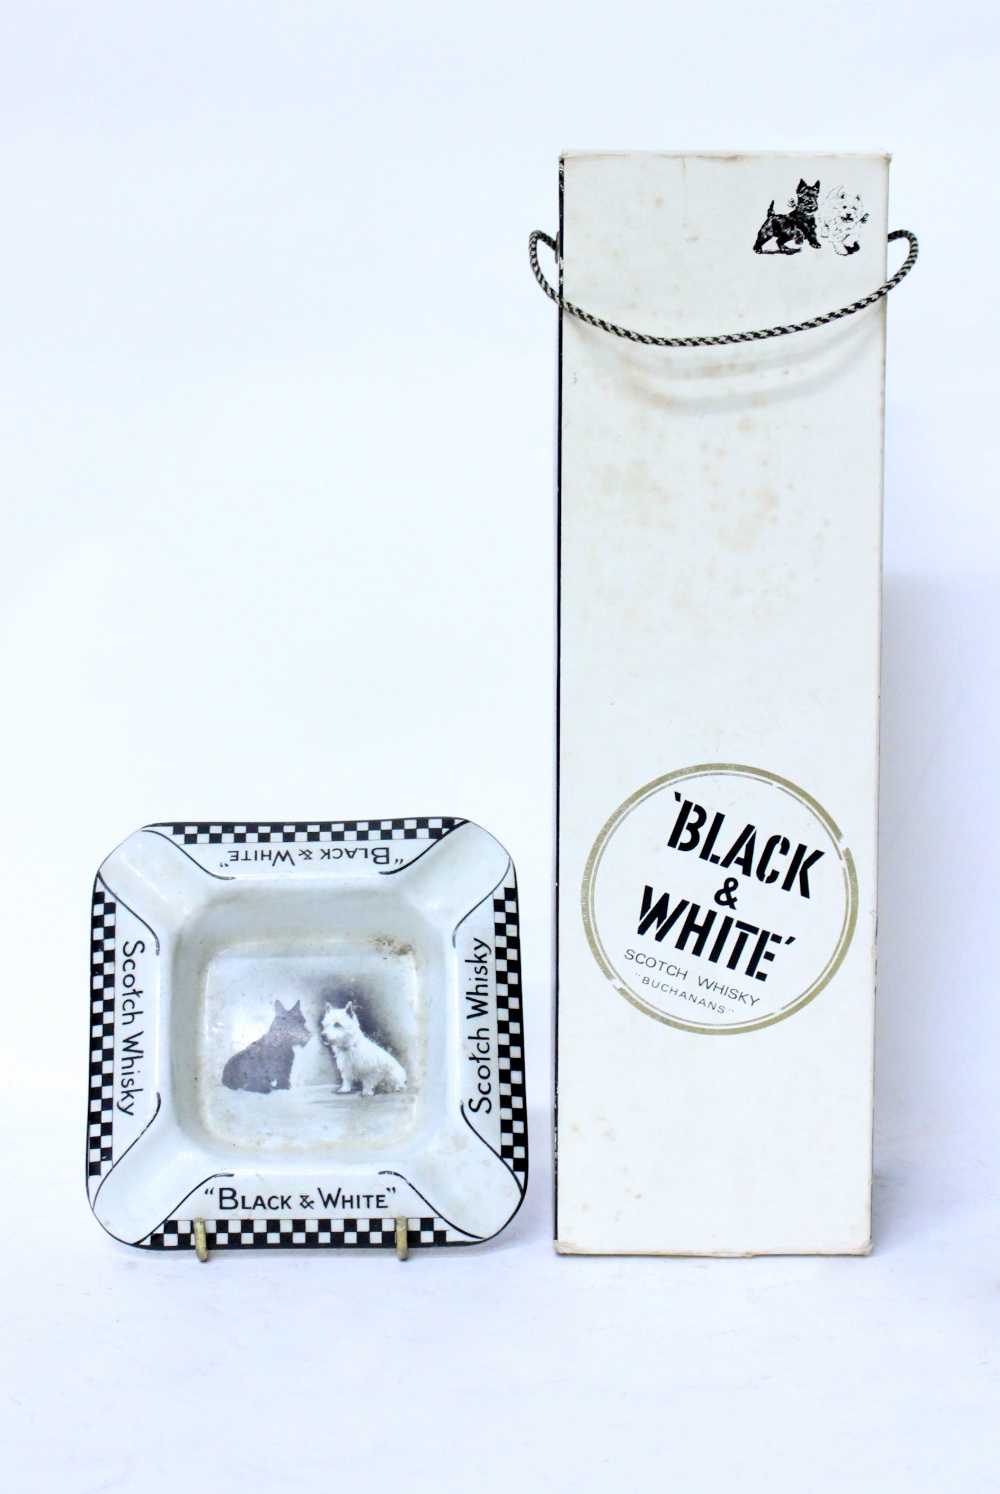 A BOTTLE OF BUCHANAN'S 'BLACK & WHITE' SCOTCH WHISKY together with an advertising ashtray for the